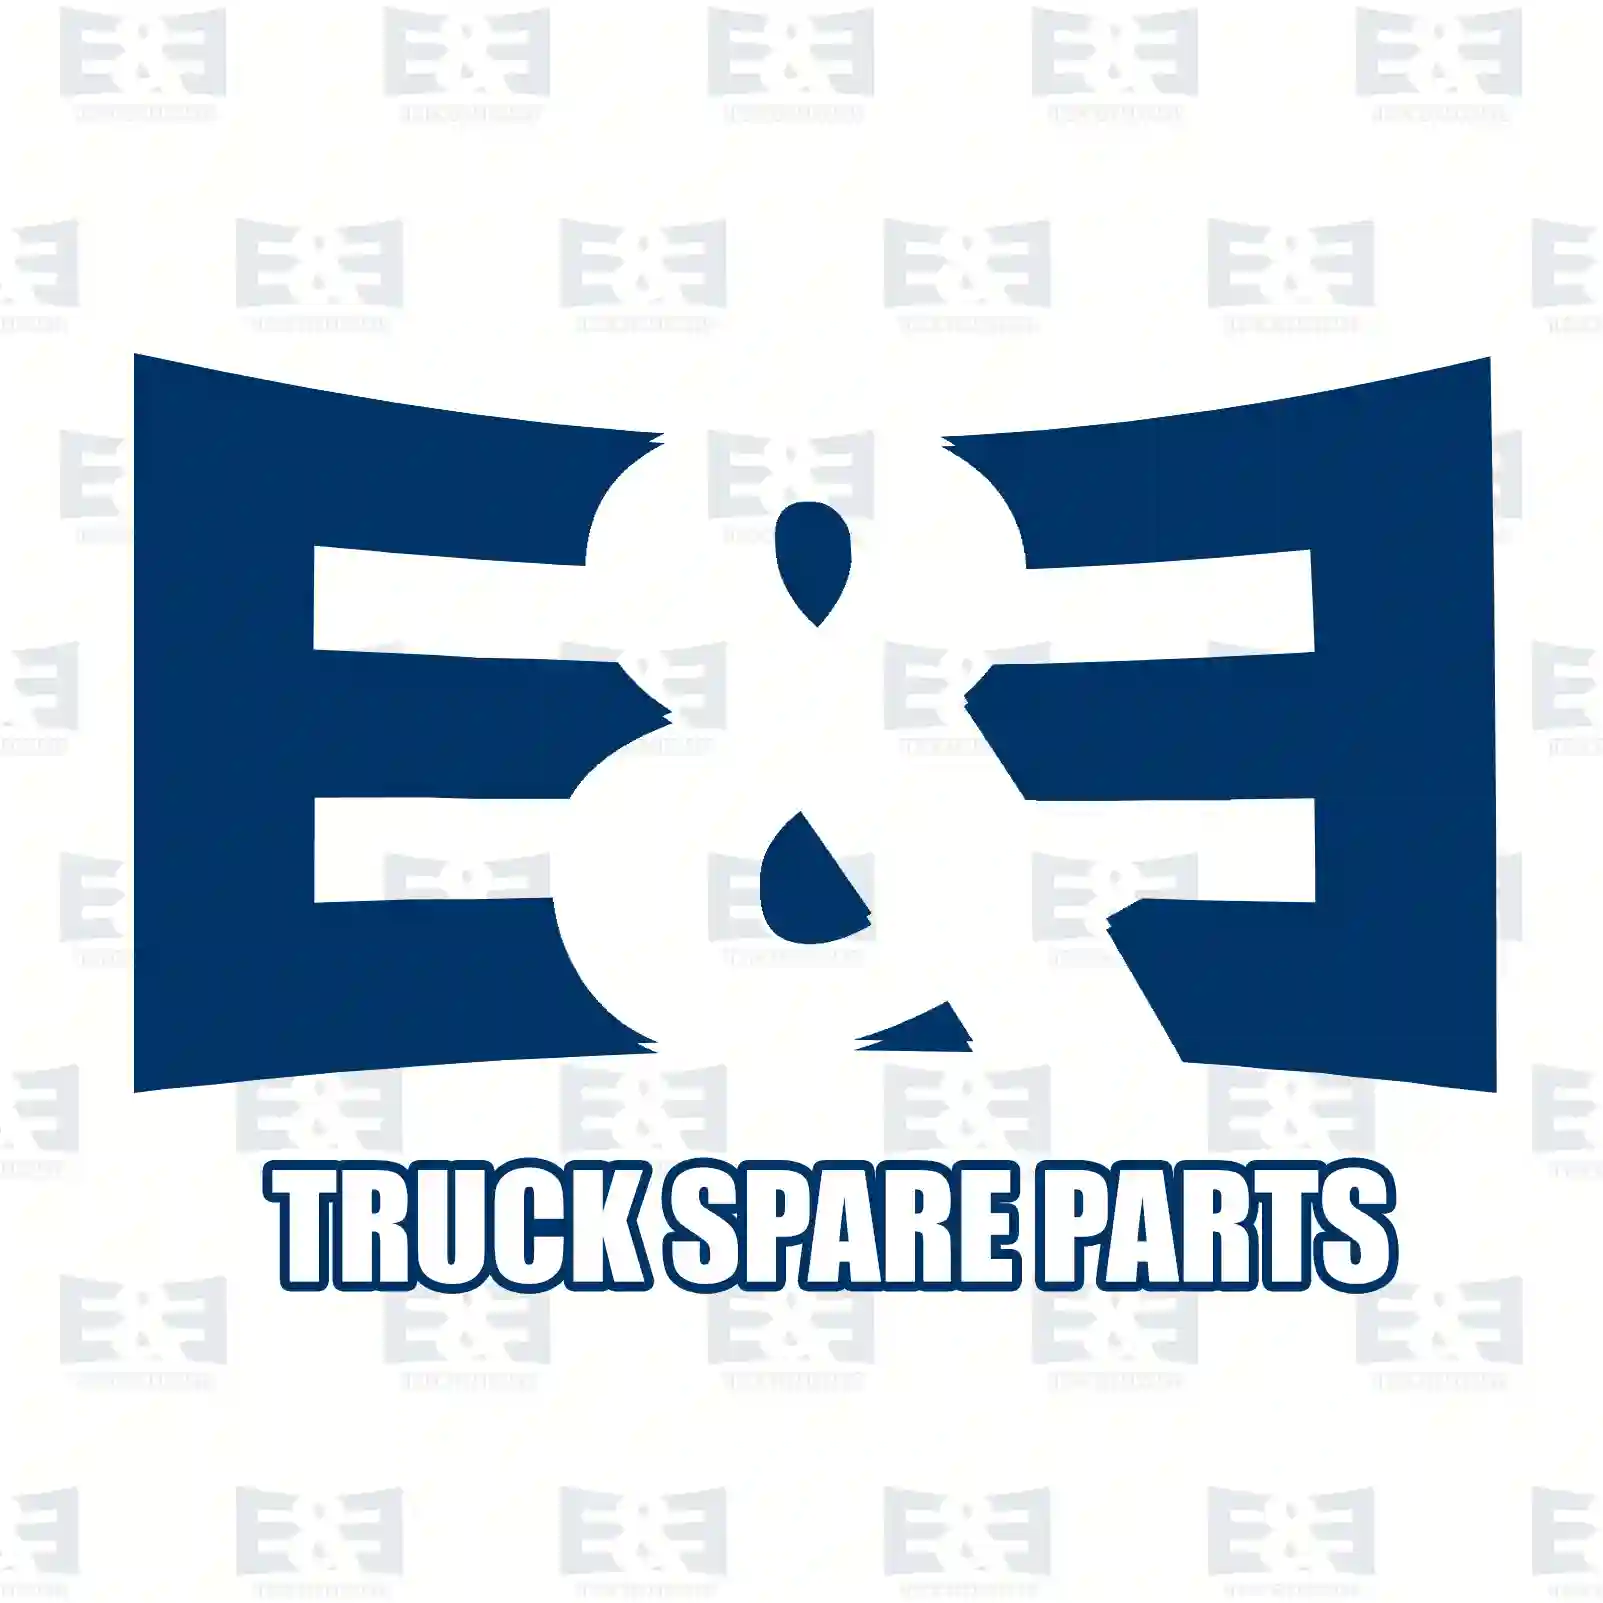  Master cylinder || E&E Truck Spare Parts | Truck Spare Parts, Auotomotive Spare Parts